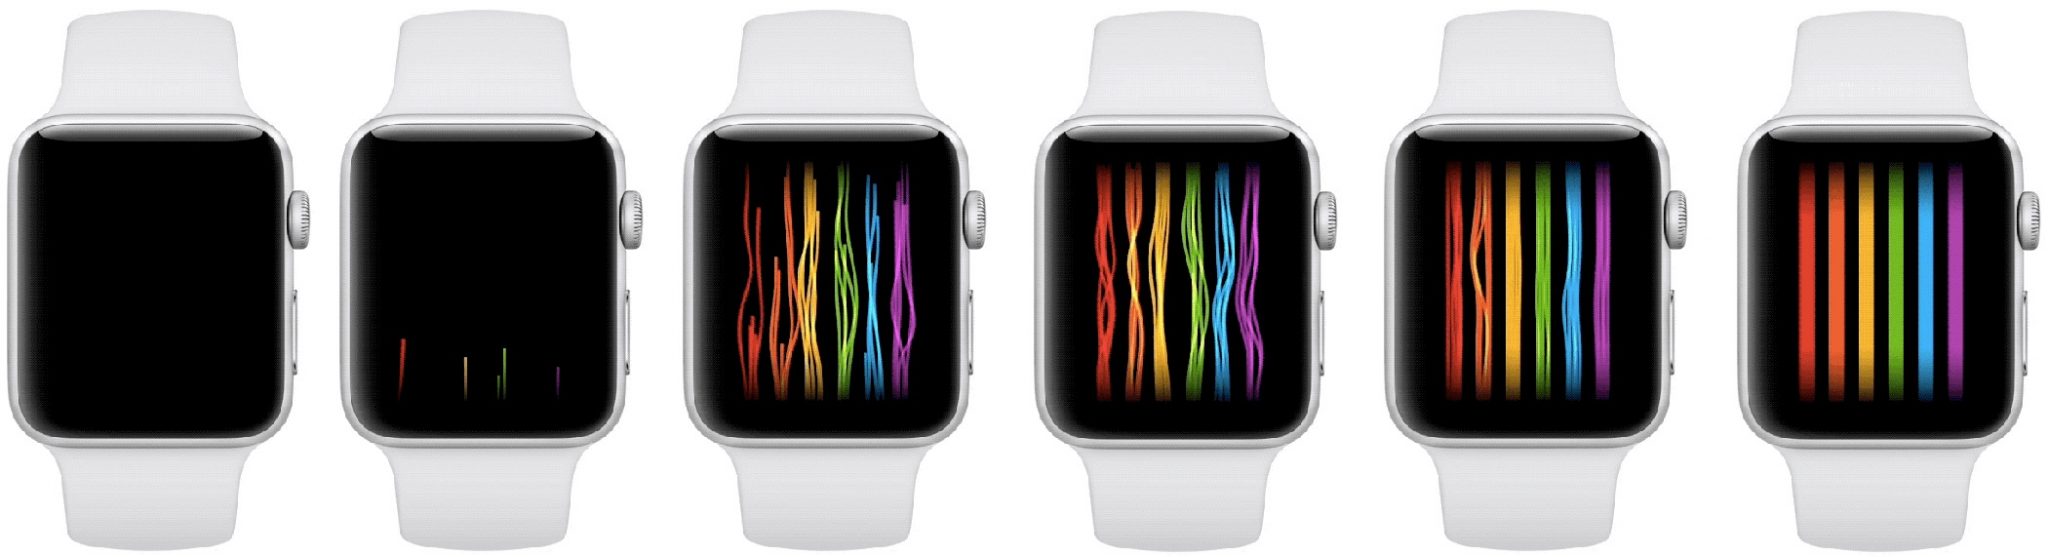 How to set the Pride watch face for Apple Watch now